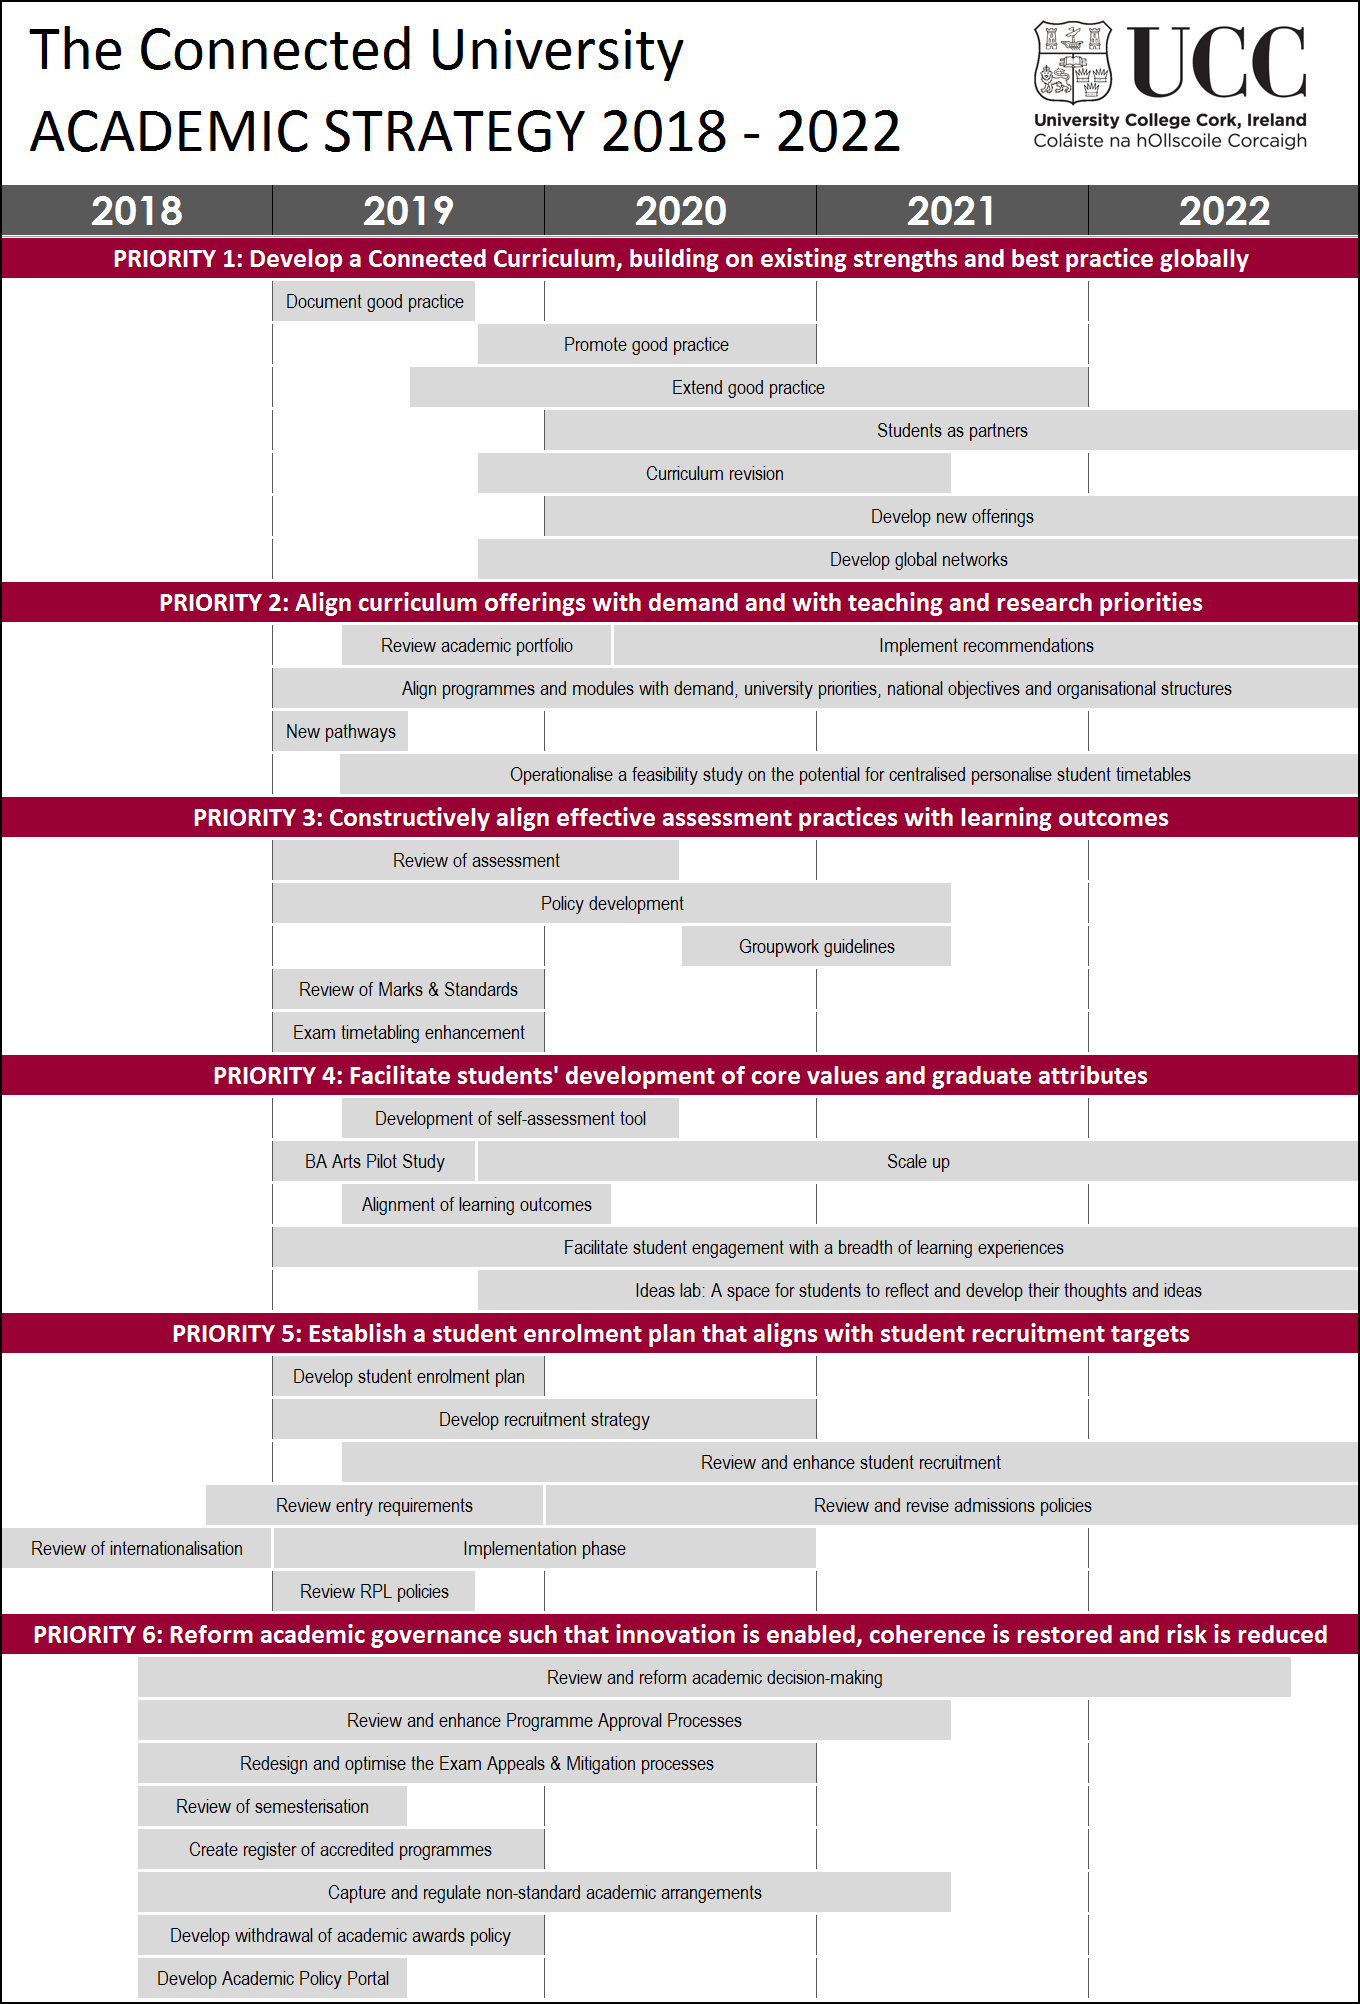 Academic Strategy Implementation Timeline